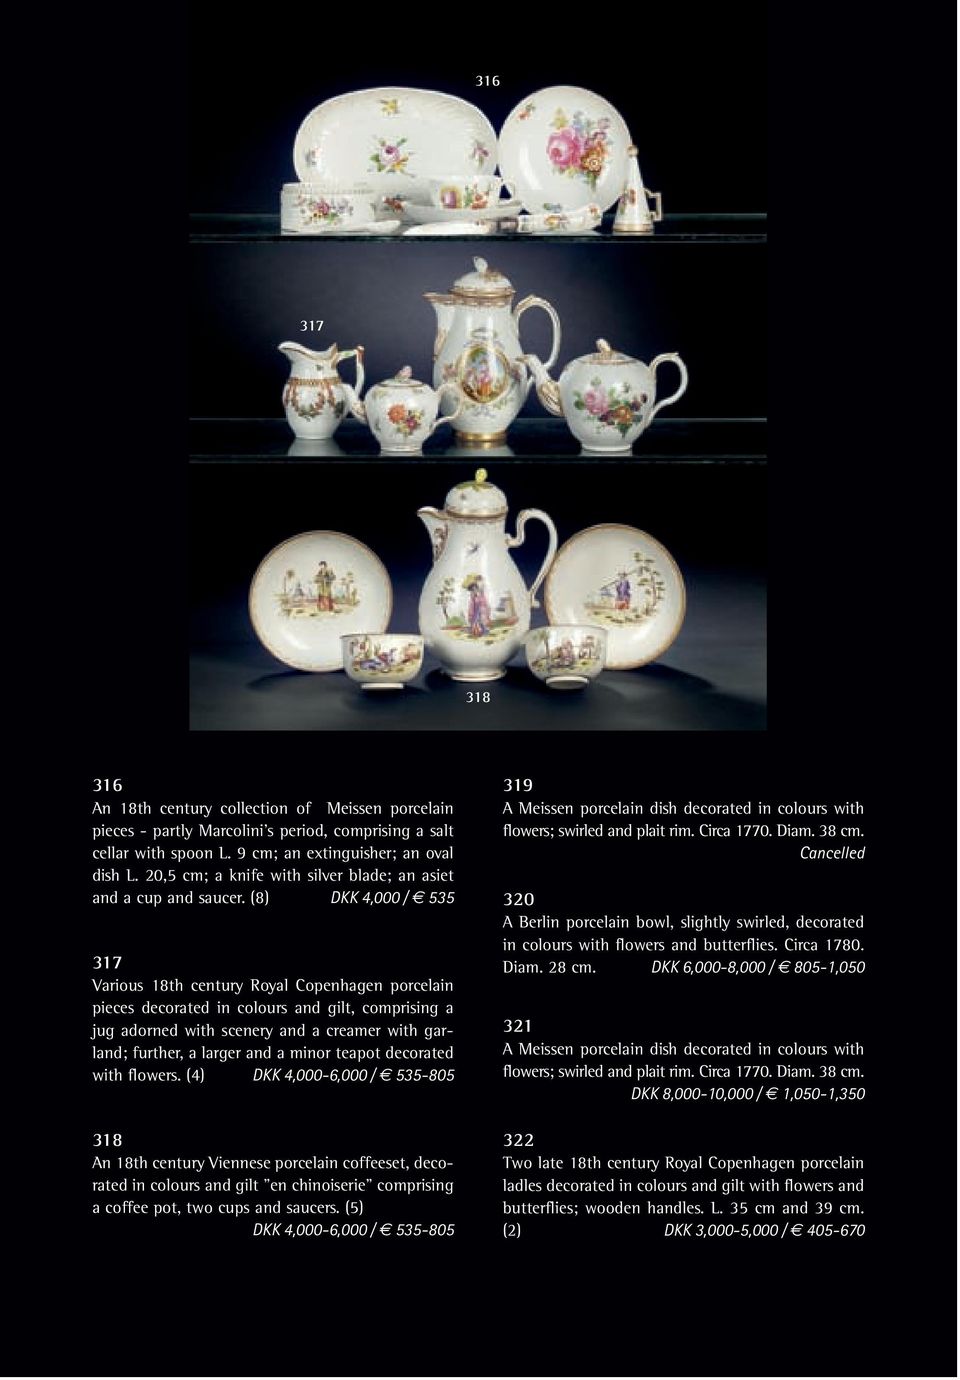 (8) DKK 4,000 / 535 317 Various 18th century Royal Copenhagen porcelain pieces decorated in colours and gilt, comprising a jug adorned with scenery and a creamer with garland; further, a larger and a